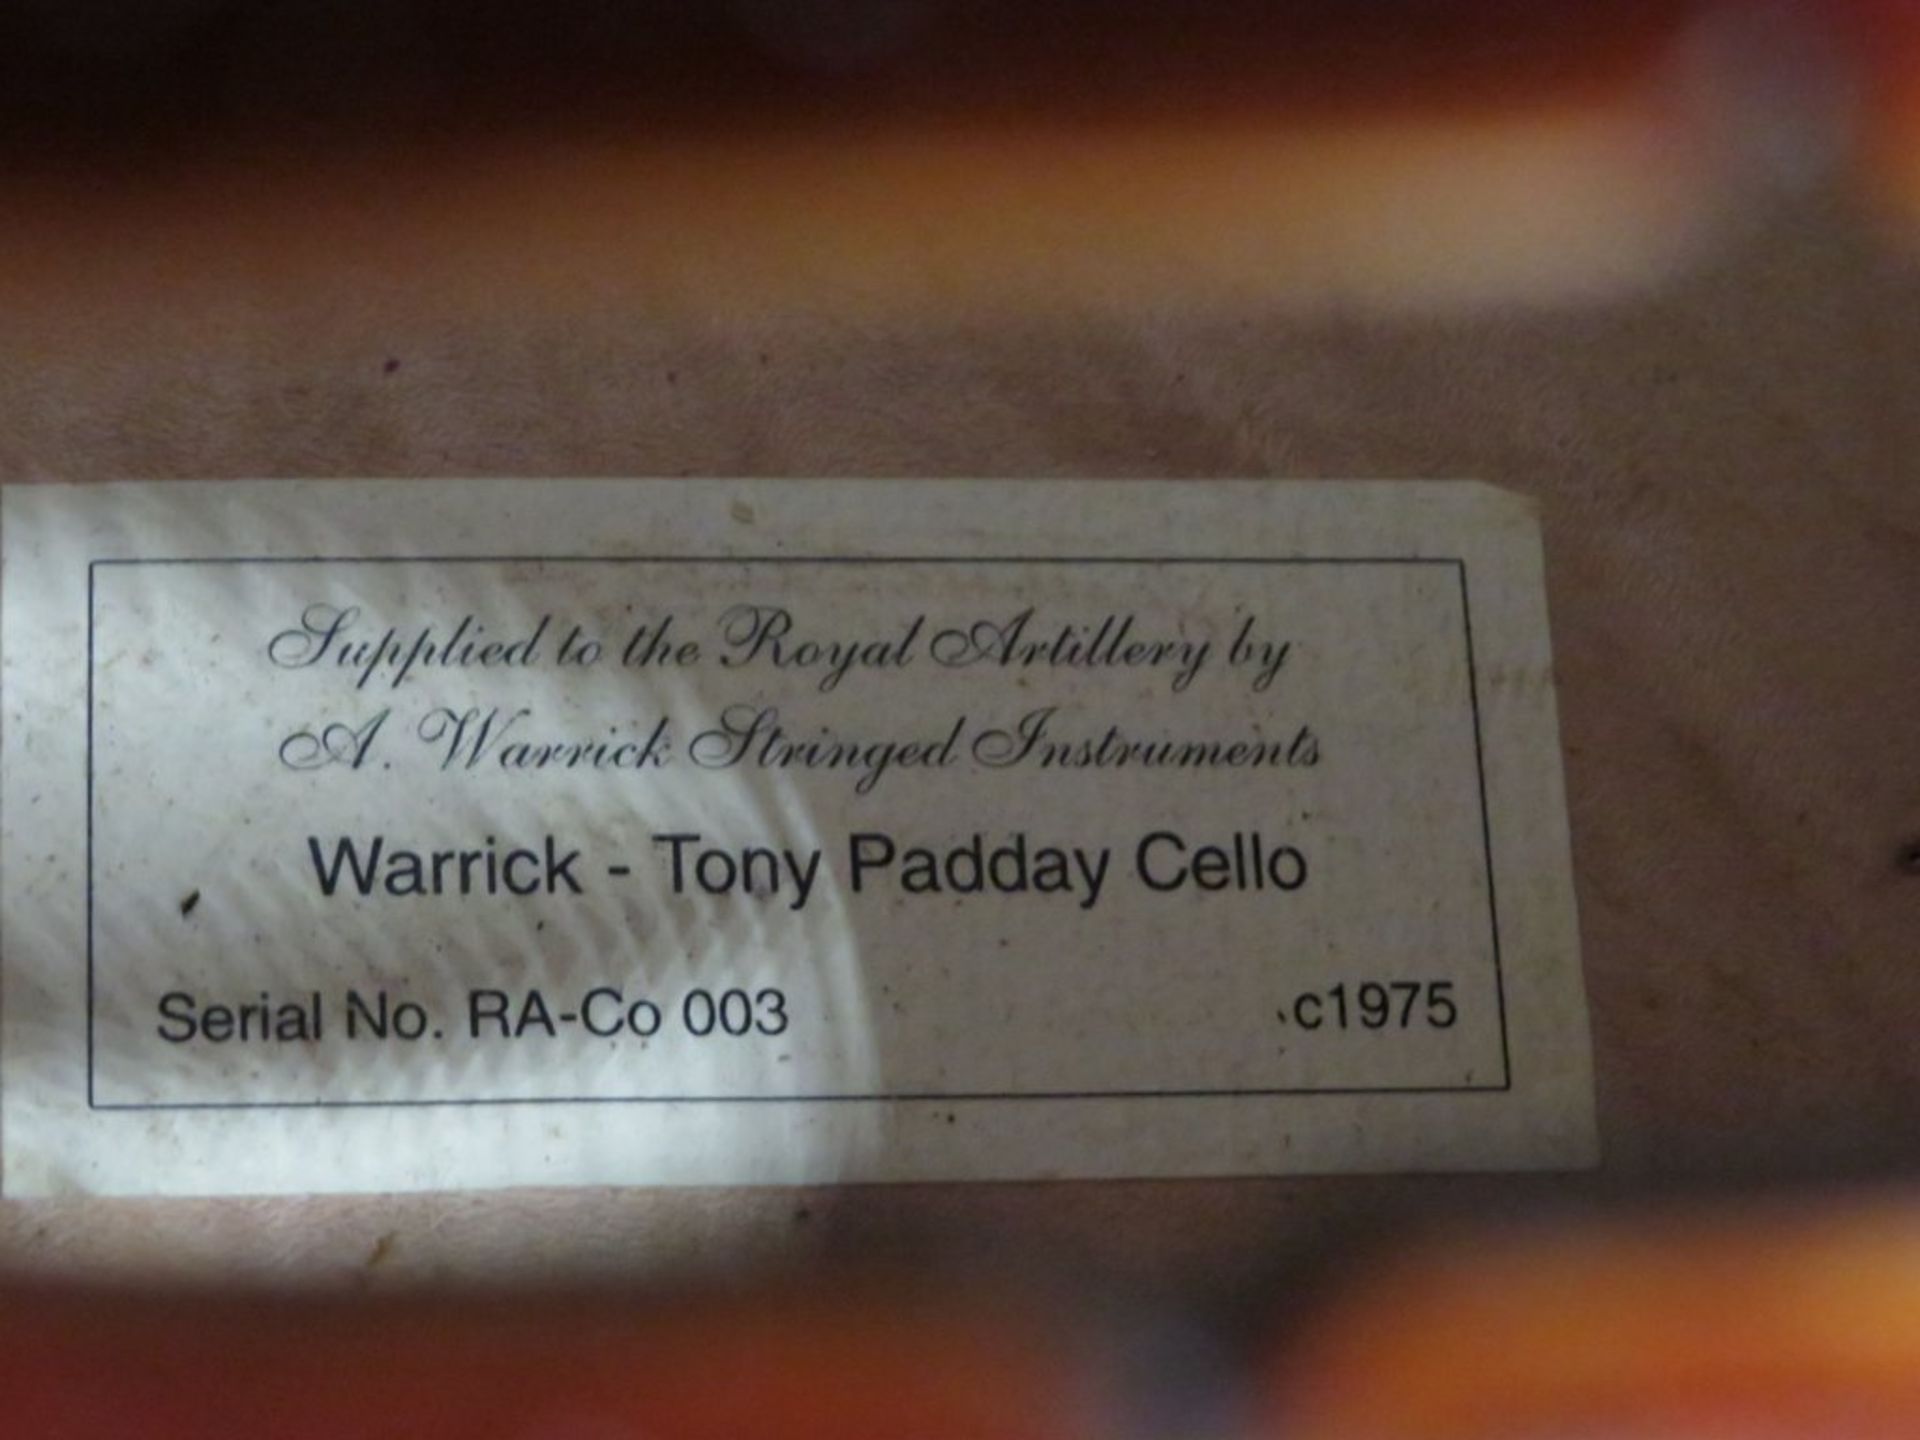 Warrick - Tony Paddy 4/4 Cello. Serial Number: RA-Co 003. C1975. Approximately 48"" Full L - Image 11 of 13